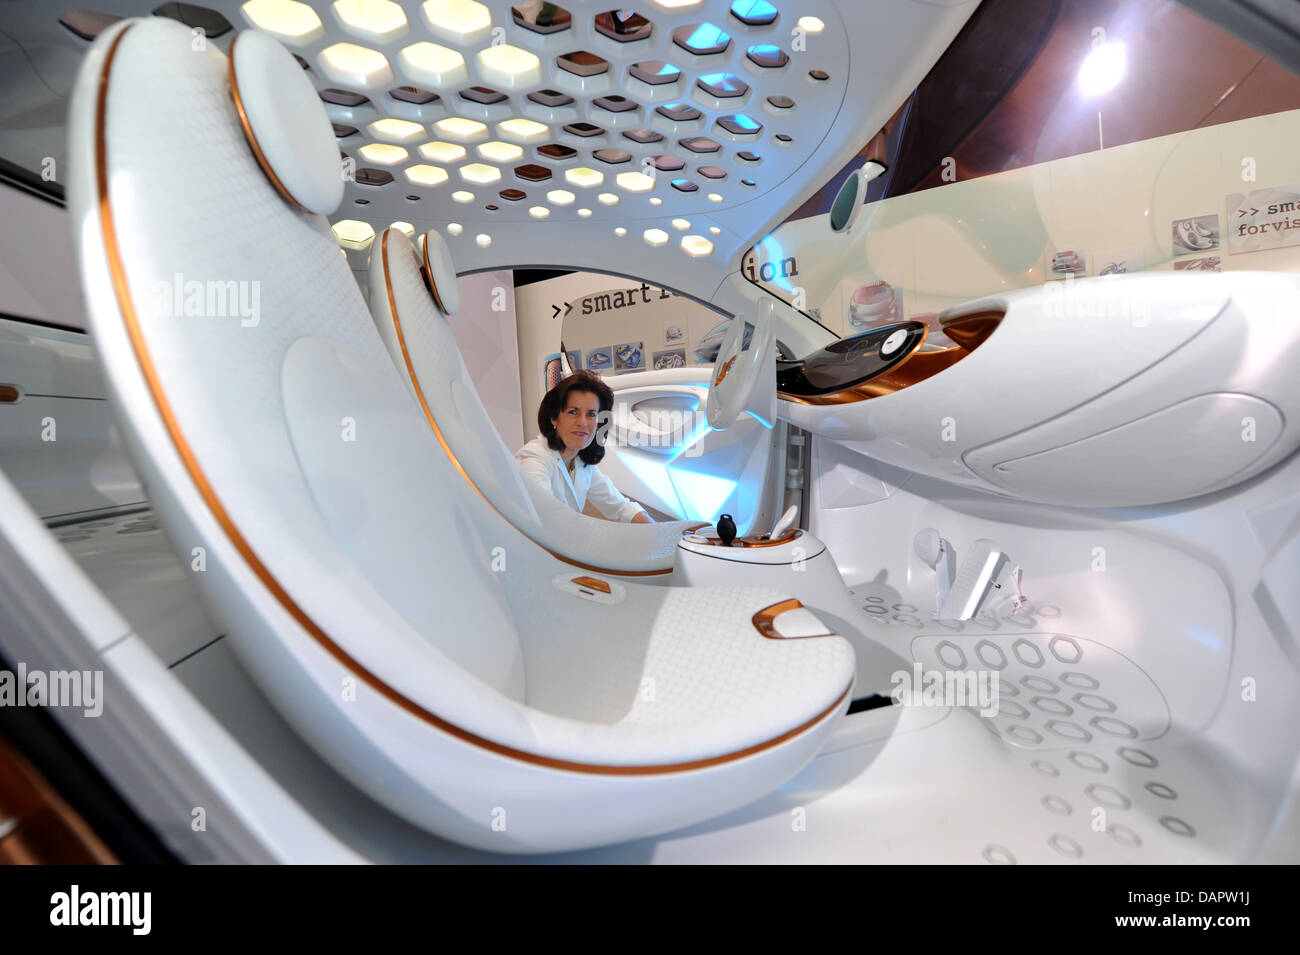 Head of car manufacturer Smart Annette Winkler poses next to a concept car Smart forvision in Sindelfingen, Germany, 30 August 2011. The concept car, which was built by car manufacturer Daimler and  the chemical corporation BASF, stands out for new technologies for more energy efficiency, lightweight construction, temperature management and design. Photo: MARIJAN MURAT Stock Photo